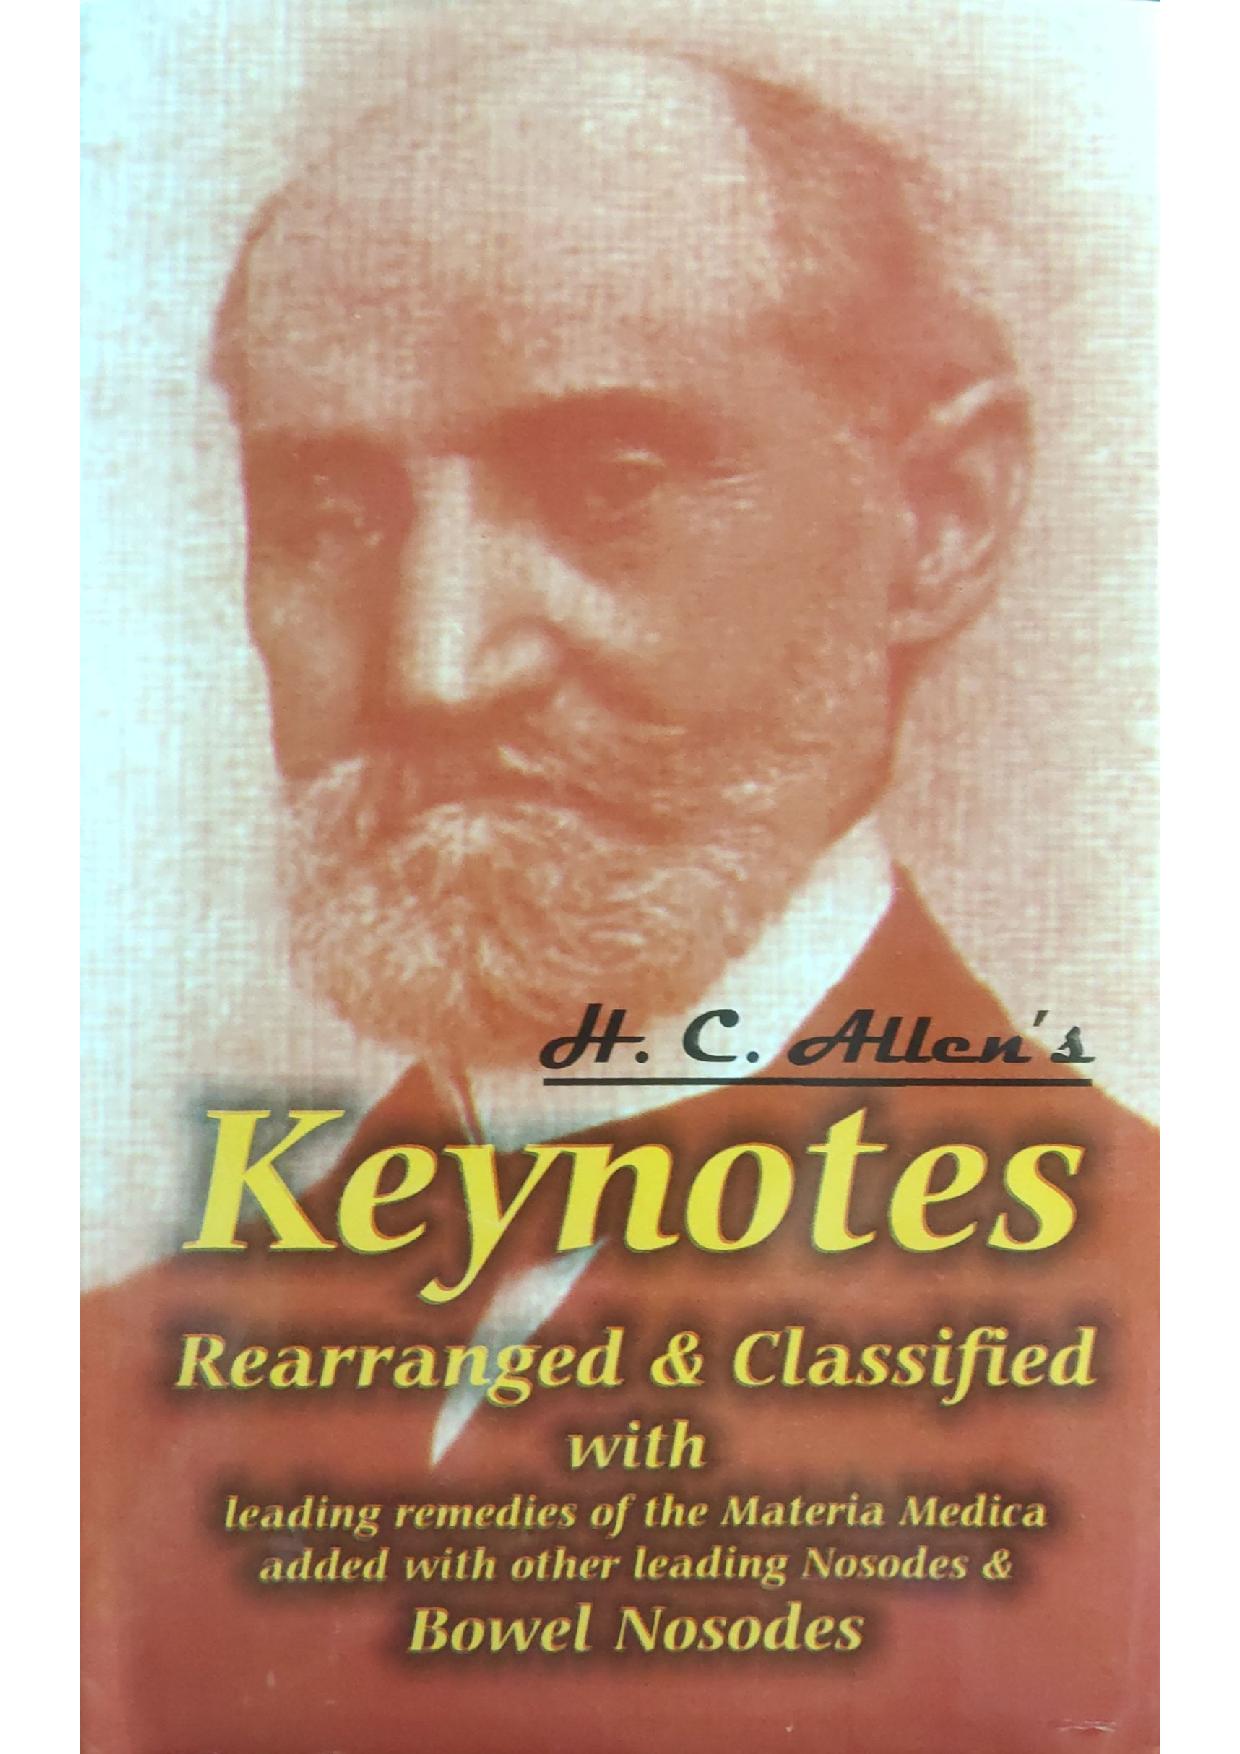 Keynotes Rearranged And Classified With Leading Remedies Of The Materia Medica&Bowel Nosod